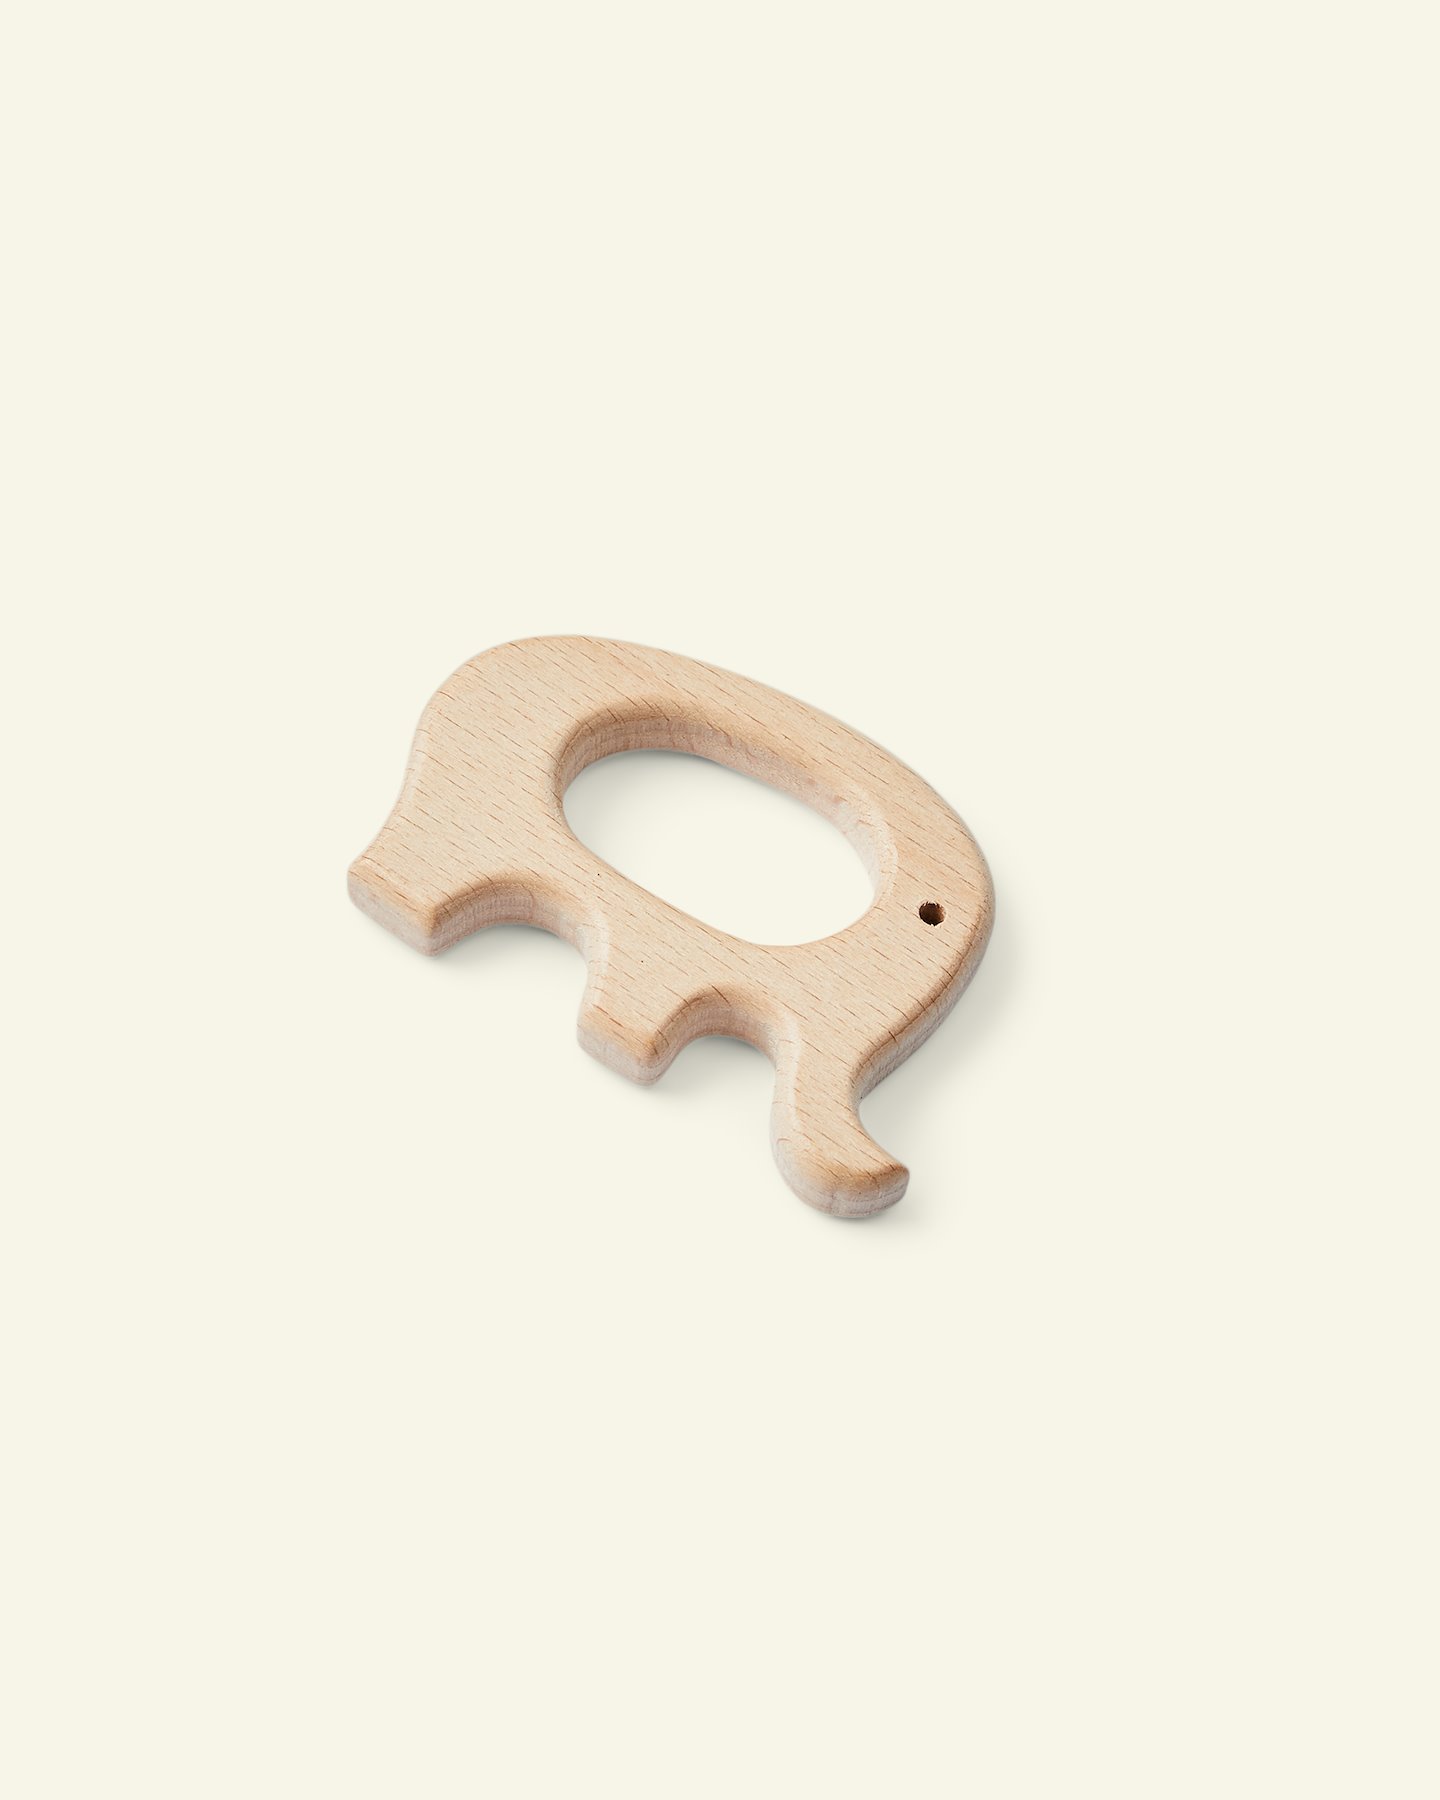 Wooden ring 69x47mm elephant 1pc 43971_pack